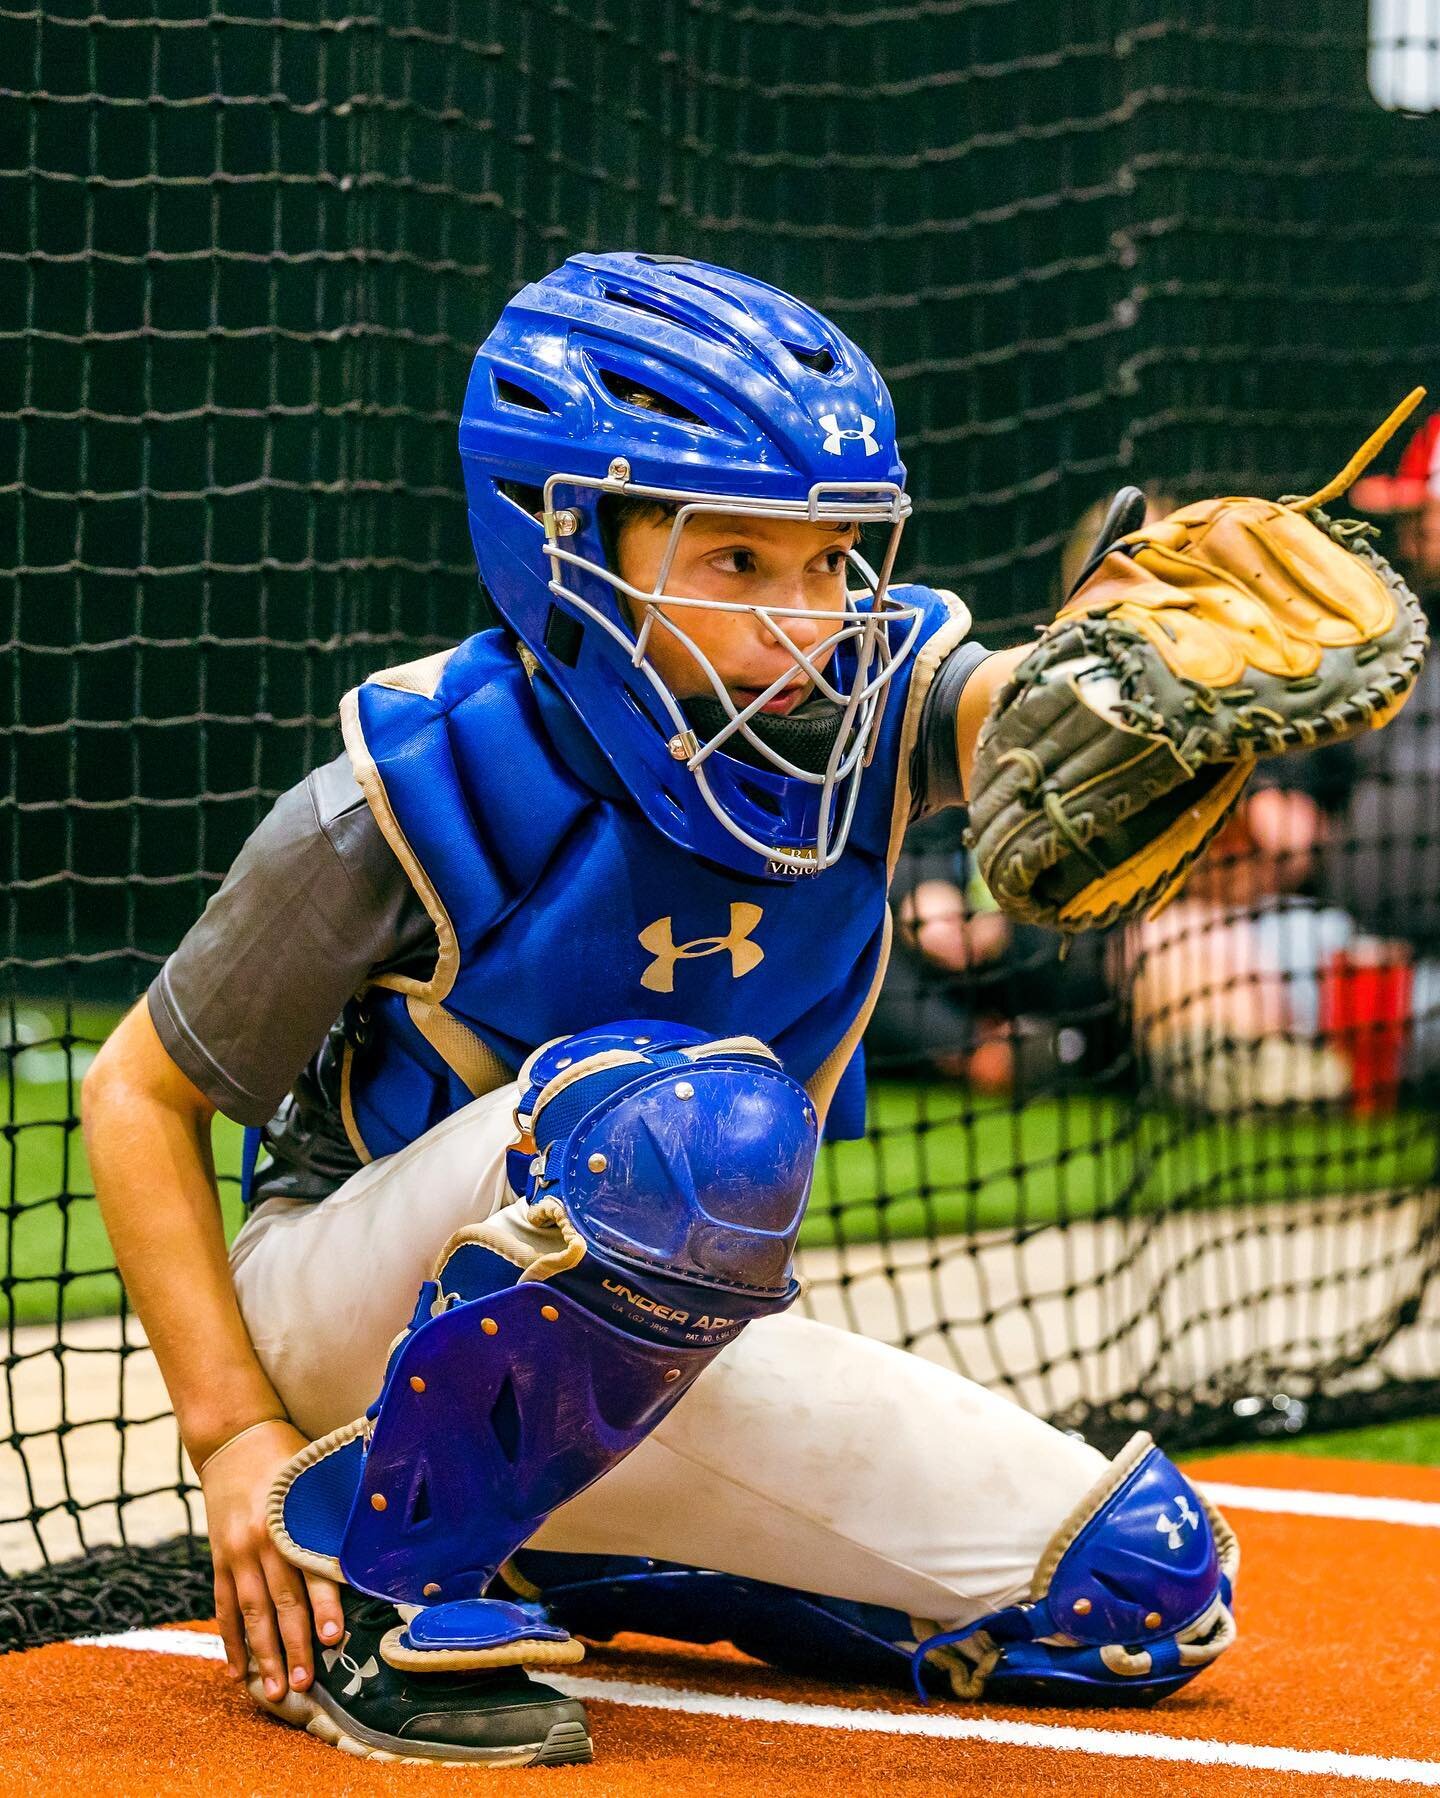 Level up your catching game with us on Monday nights! ⚾️ Join us for our Baseball Catching Clinics and let's own the field together! 🌟 

#UnleashThePower #makeithappen #baseball #softball #athens #athensga #liveworkplay #oconeeco #watkinsvillega #th